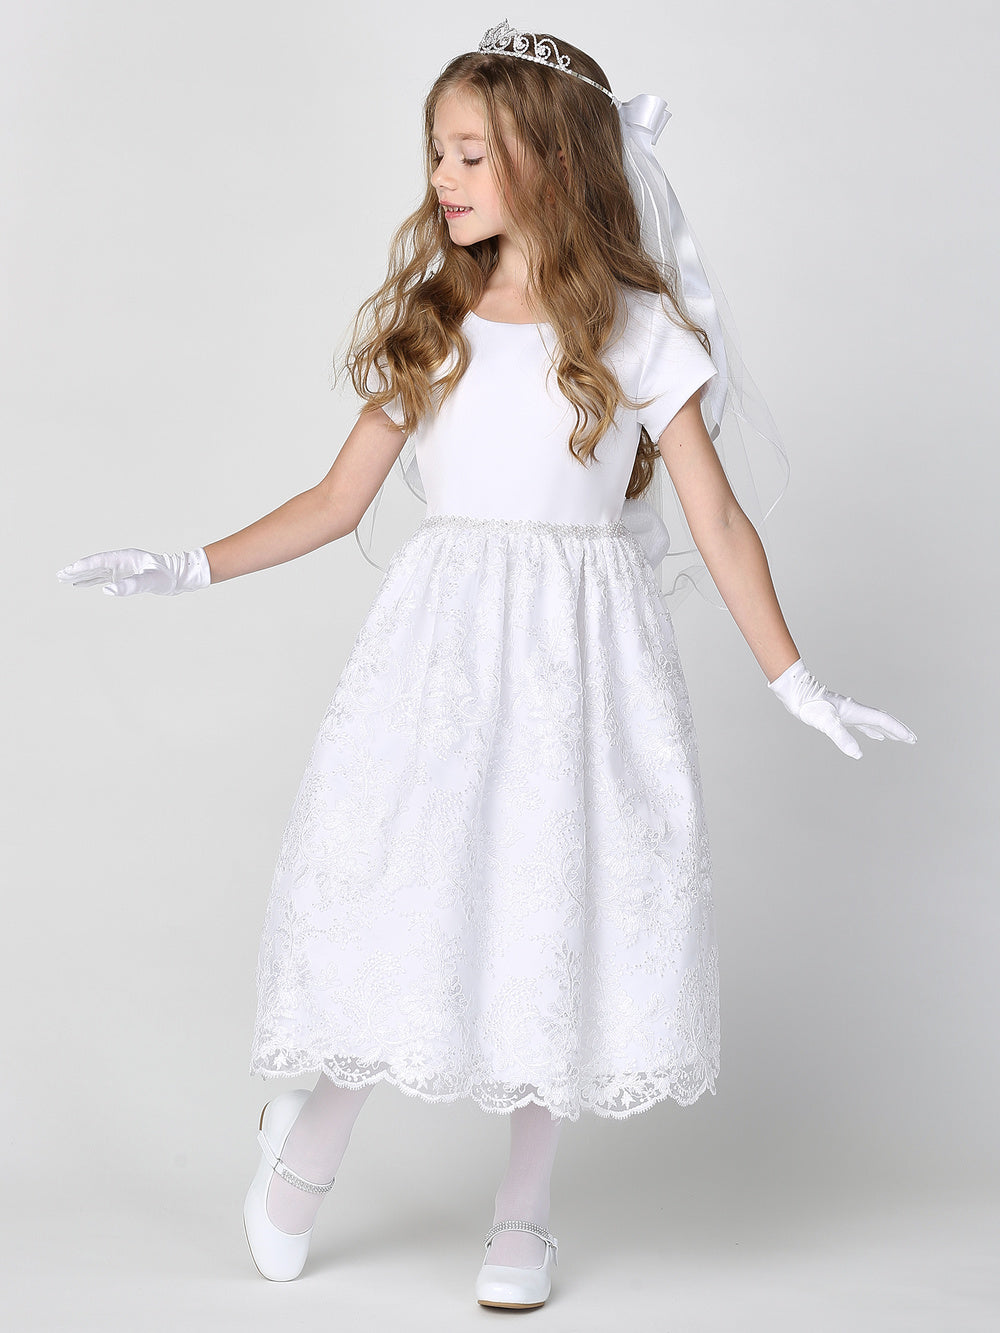 A girl wearing a beautiful white First Communion Dress with a satin bodice, corded lace skirt, and embroidered tulle with sequins. 